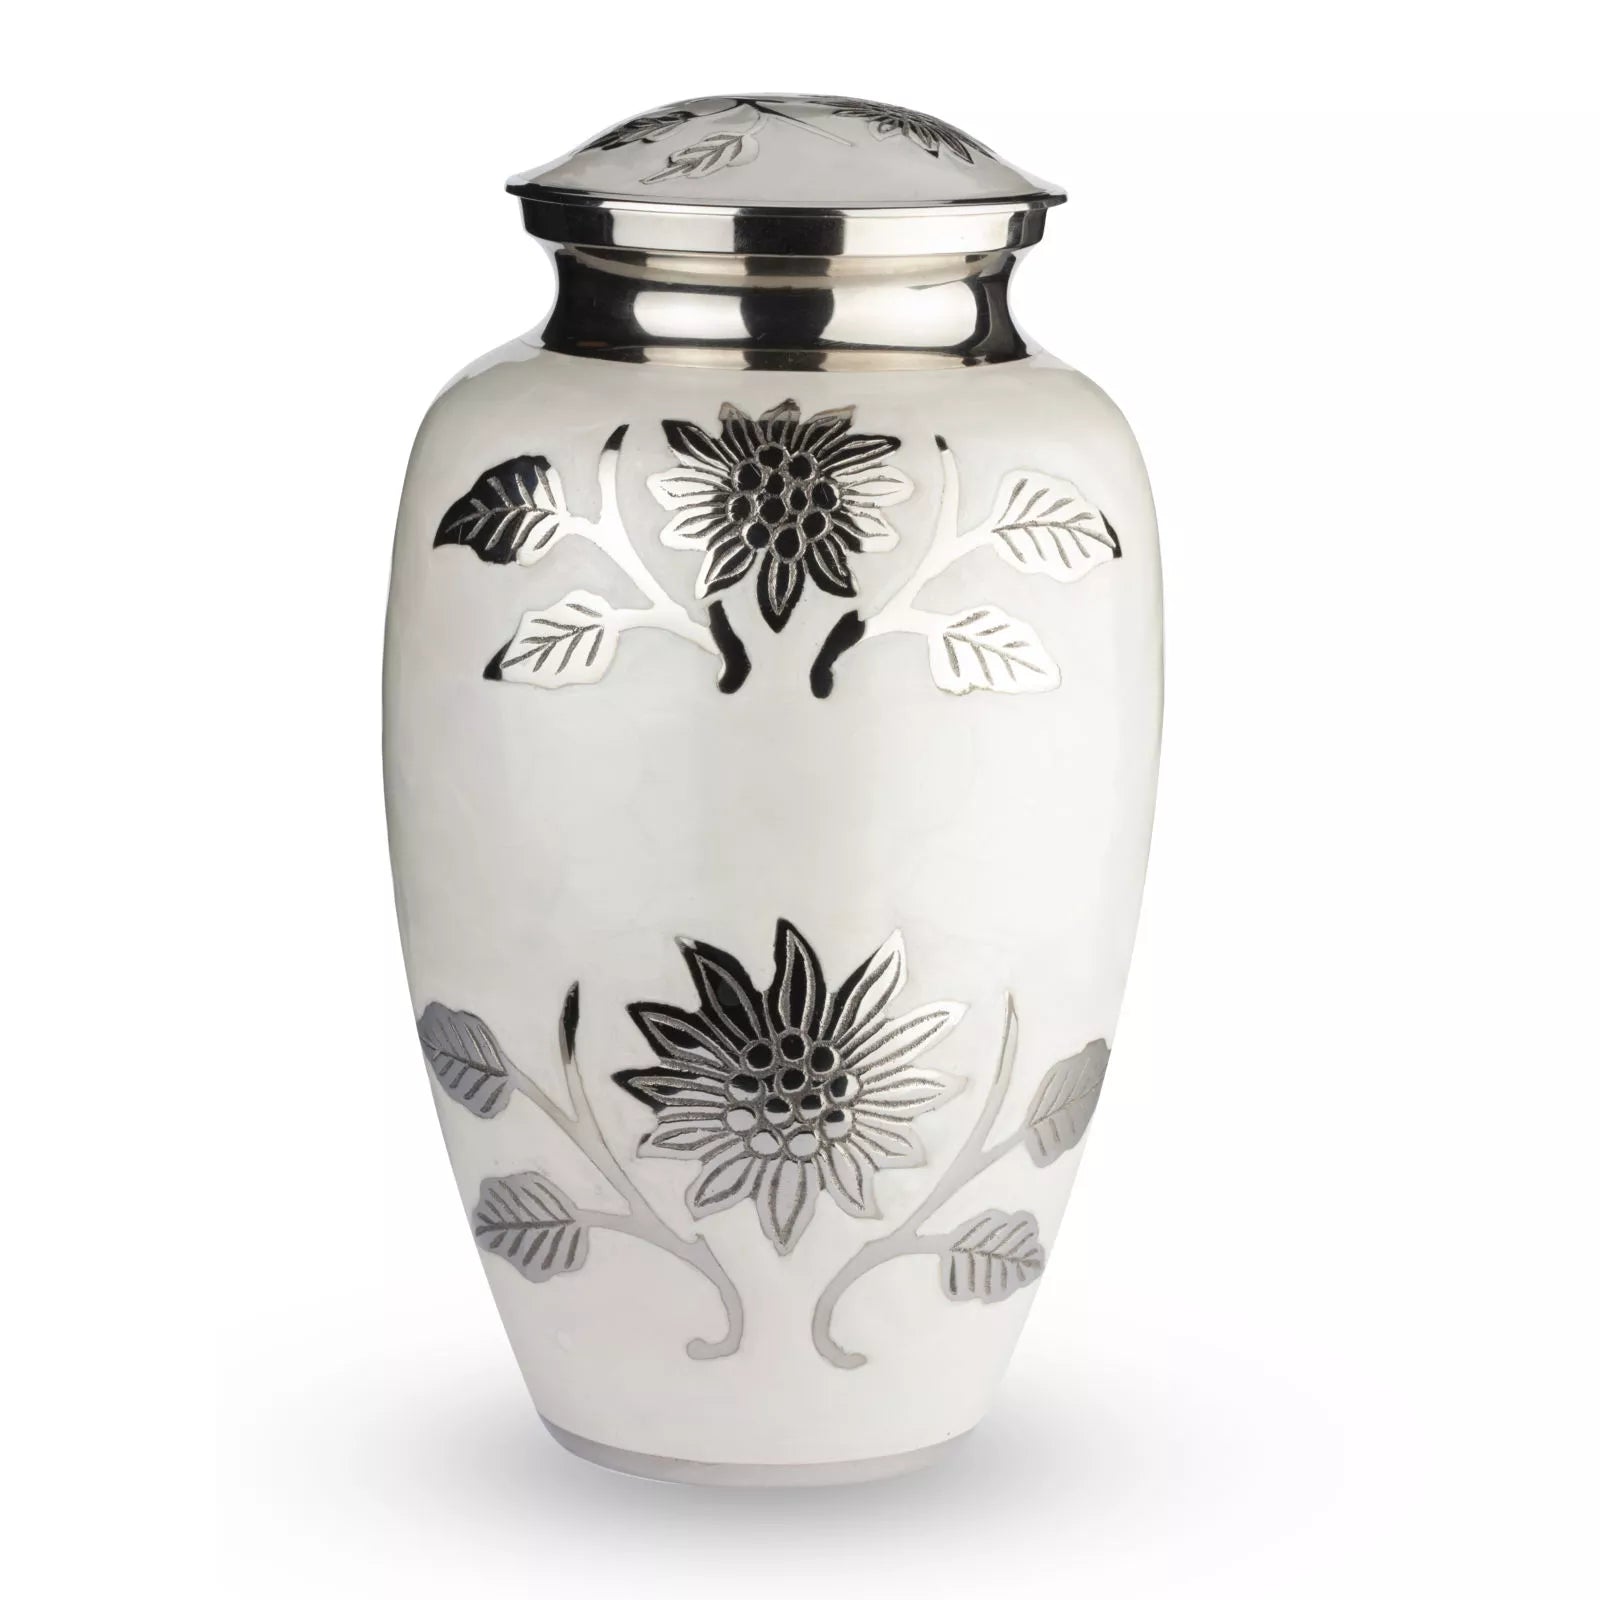 Large urn - with a floral design